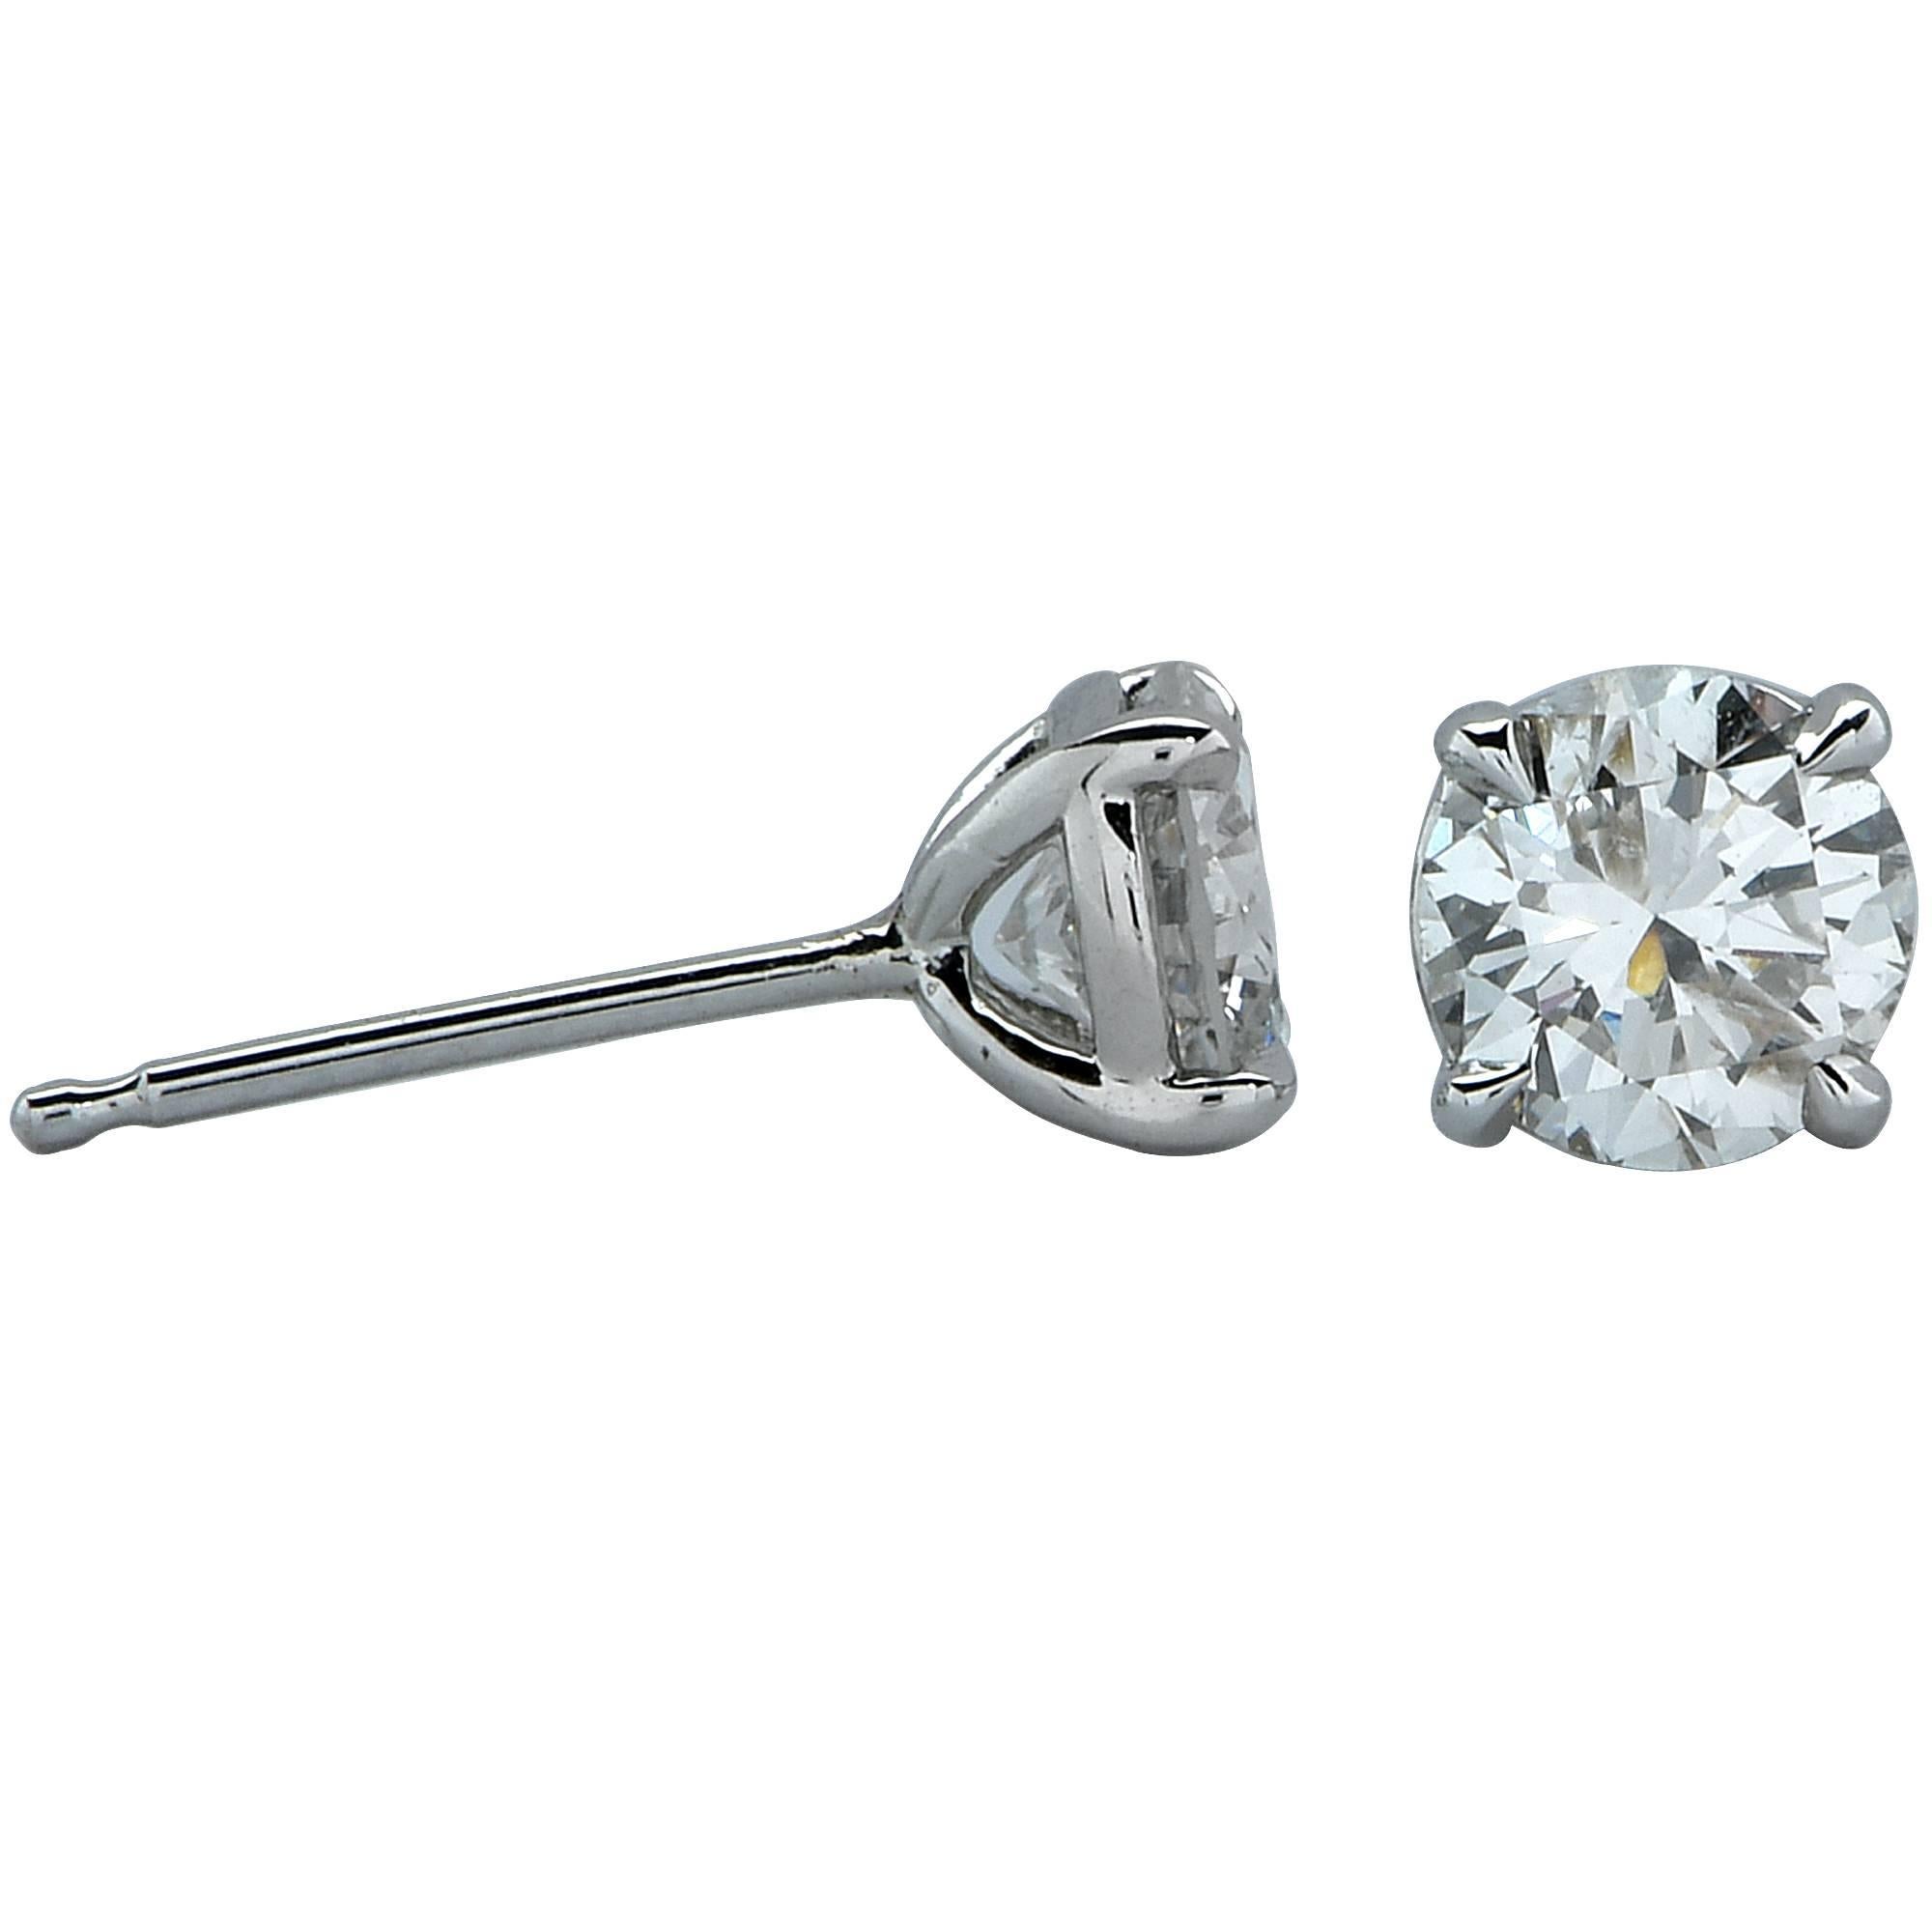 18k white gold 1.23 carat total weight diamond solitaire stud earrings featuring a matching .62ct round brilliant cut diamond H-I color and SI in clarity and .61ct round brilliant cut diamond H-I color and SI in clarity.

Measurements are available